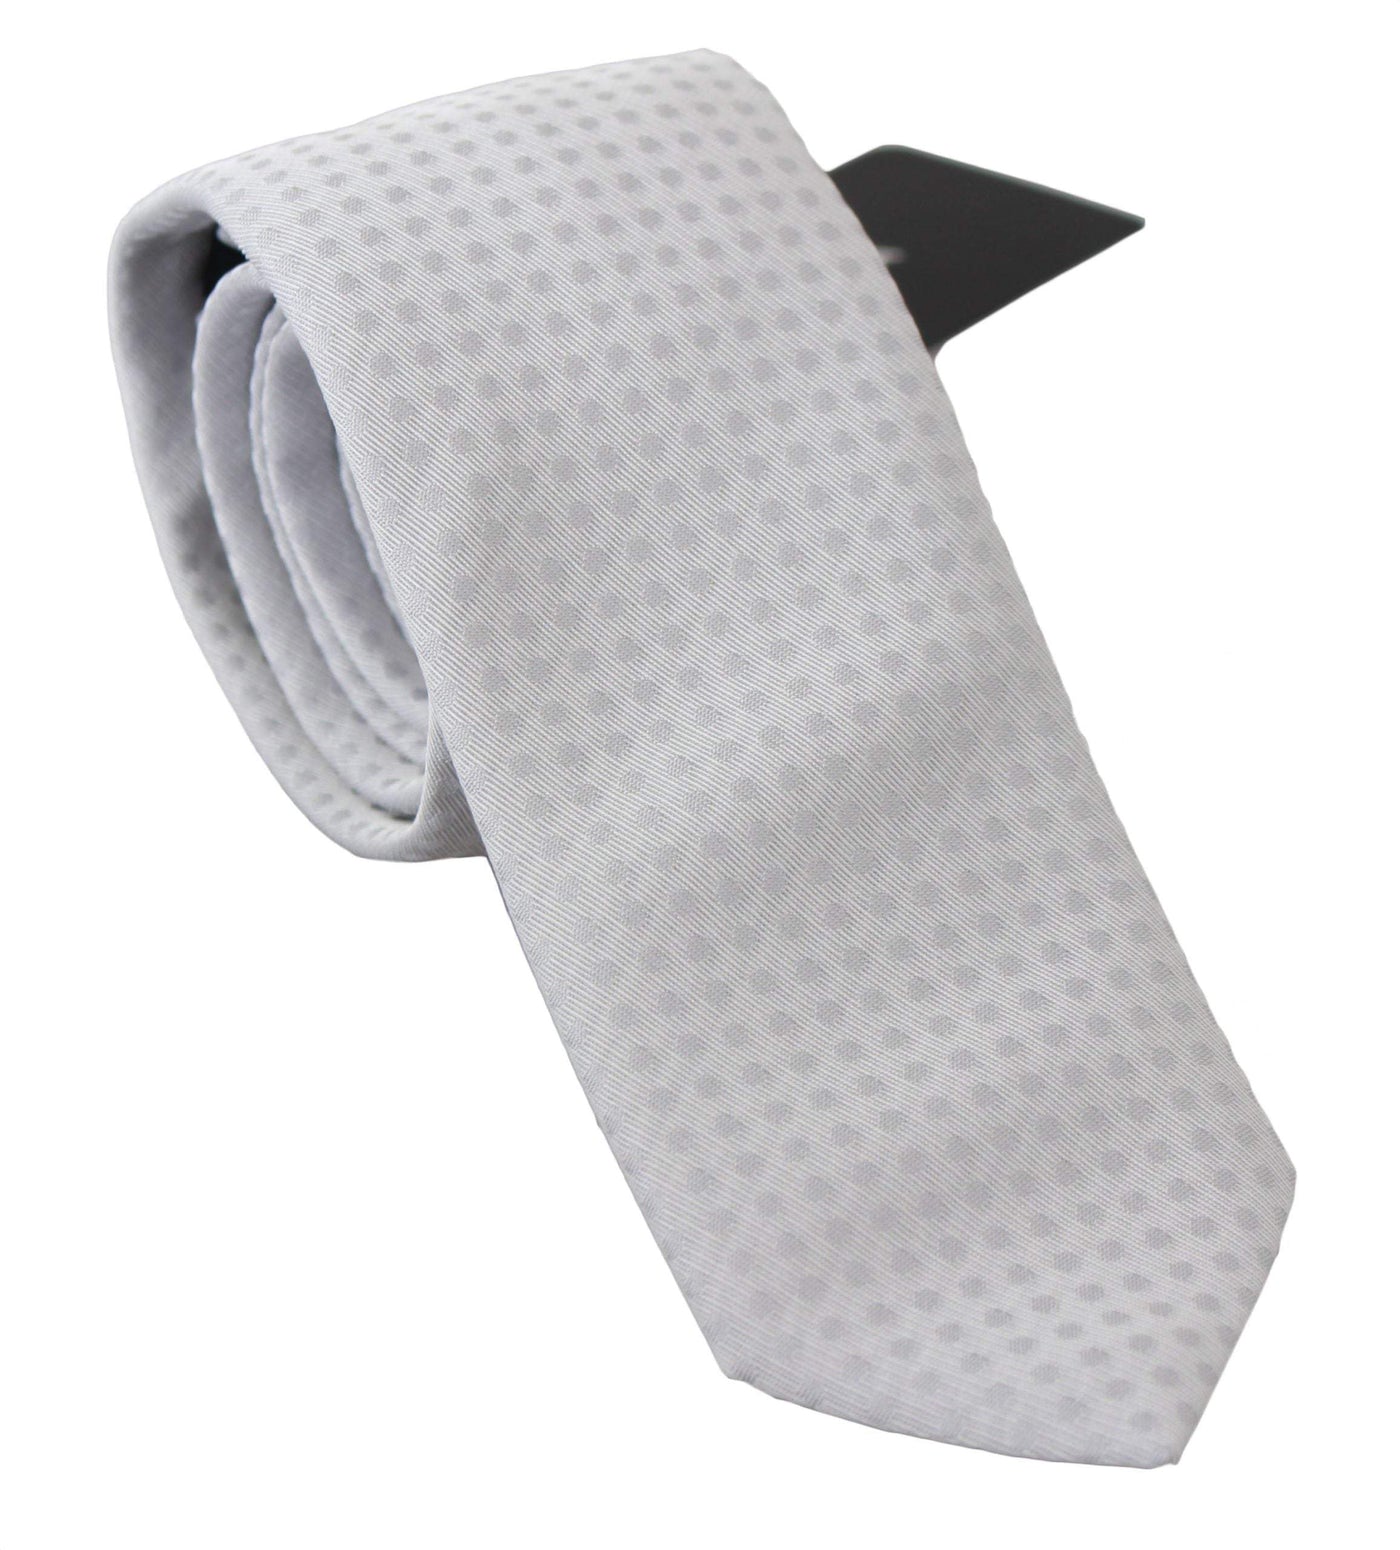 Dolce & Gabbana White Patterned Classic Mens Slim Necktie Tie #men, Accessories - New Arrivals, Brand_Dolce & Gabbana, Catch, Dolce & Gabbana, feed-agegroup-adult, feed-color-white, feed-gender-male, feed-size-OS, Gender_Men, Kogan, Ties & Bowties - Men - Accessories, White at SEYMAYKA